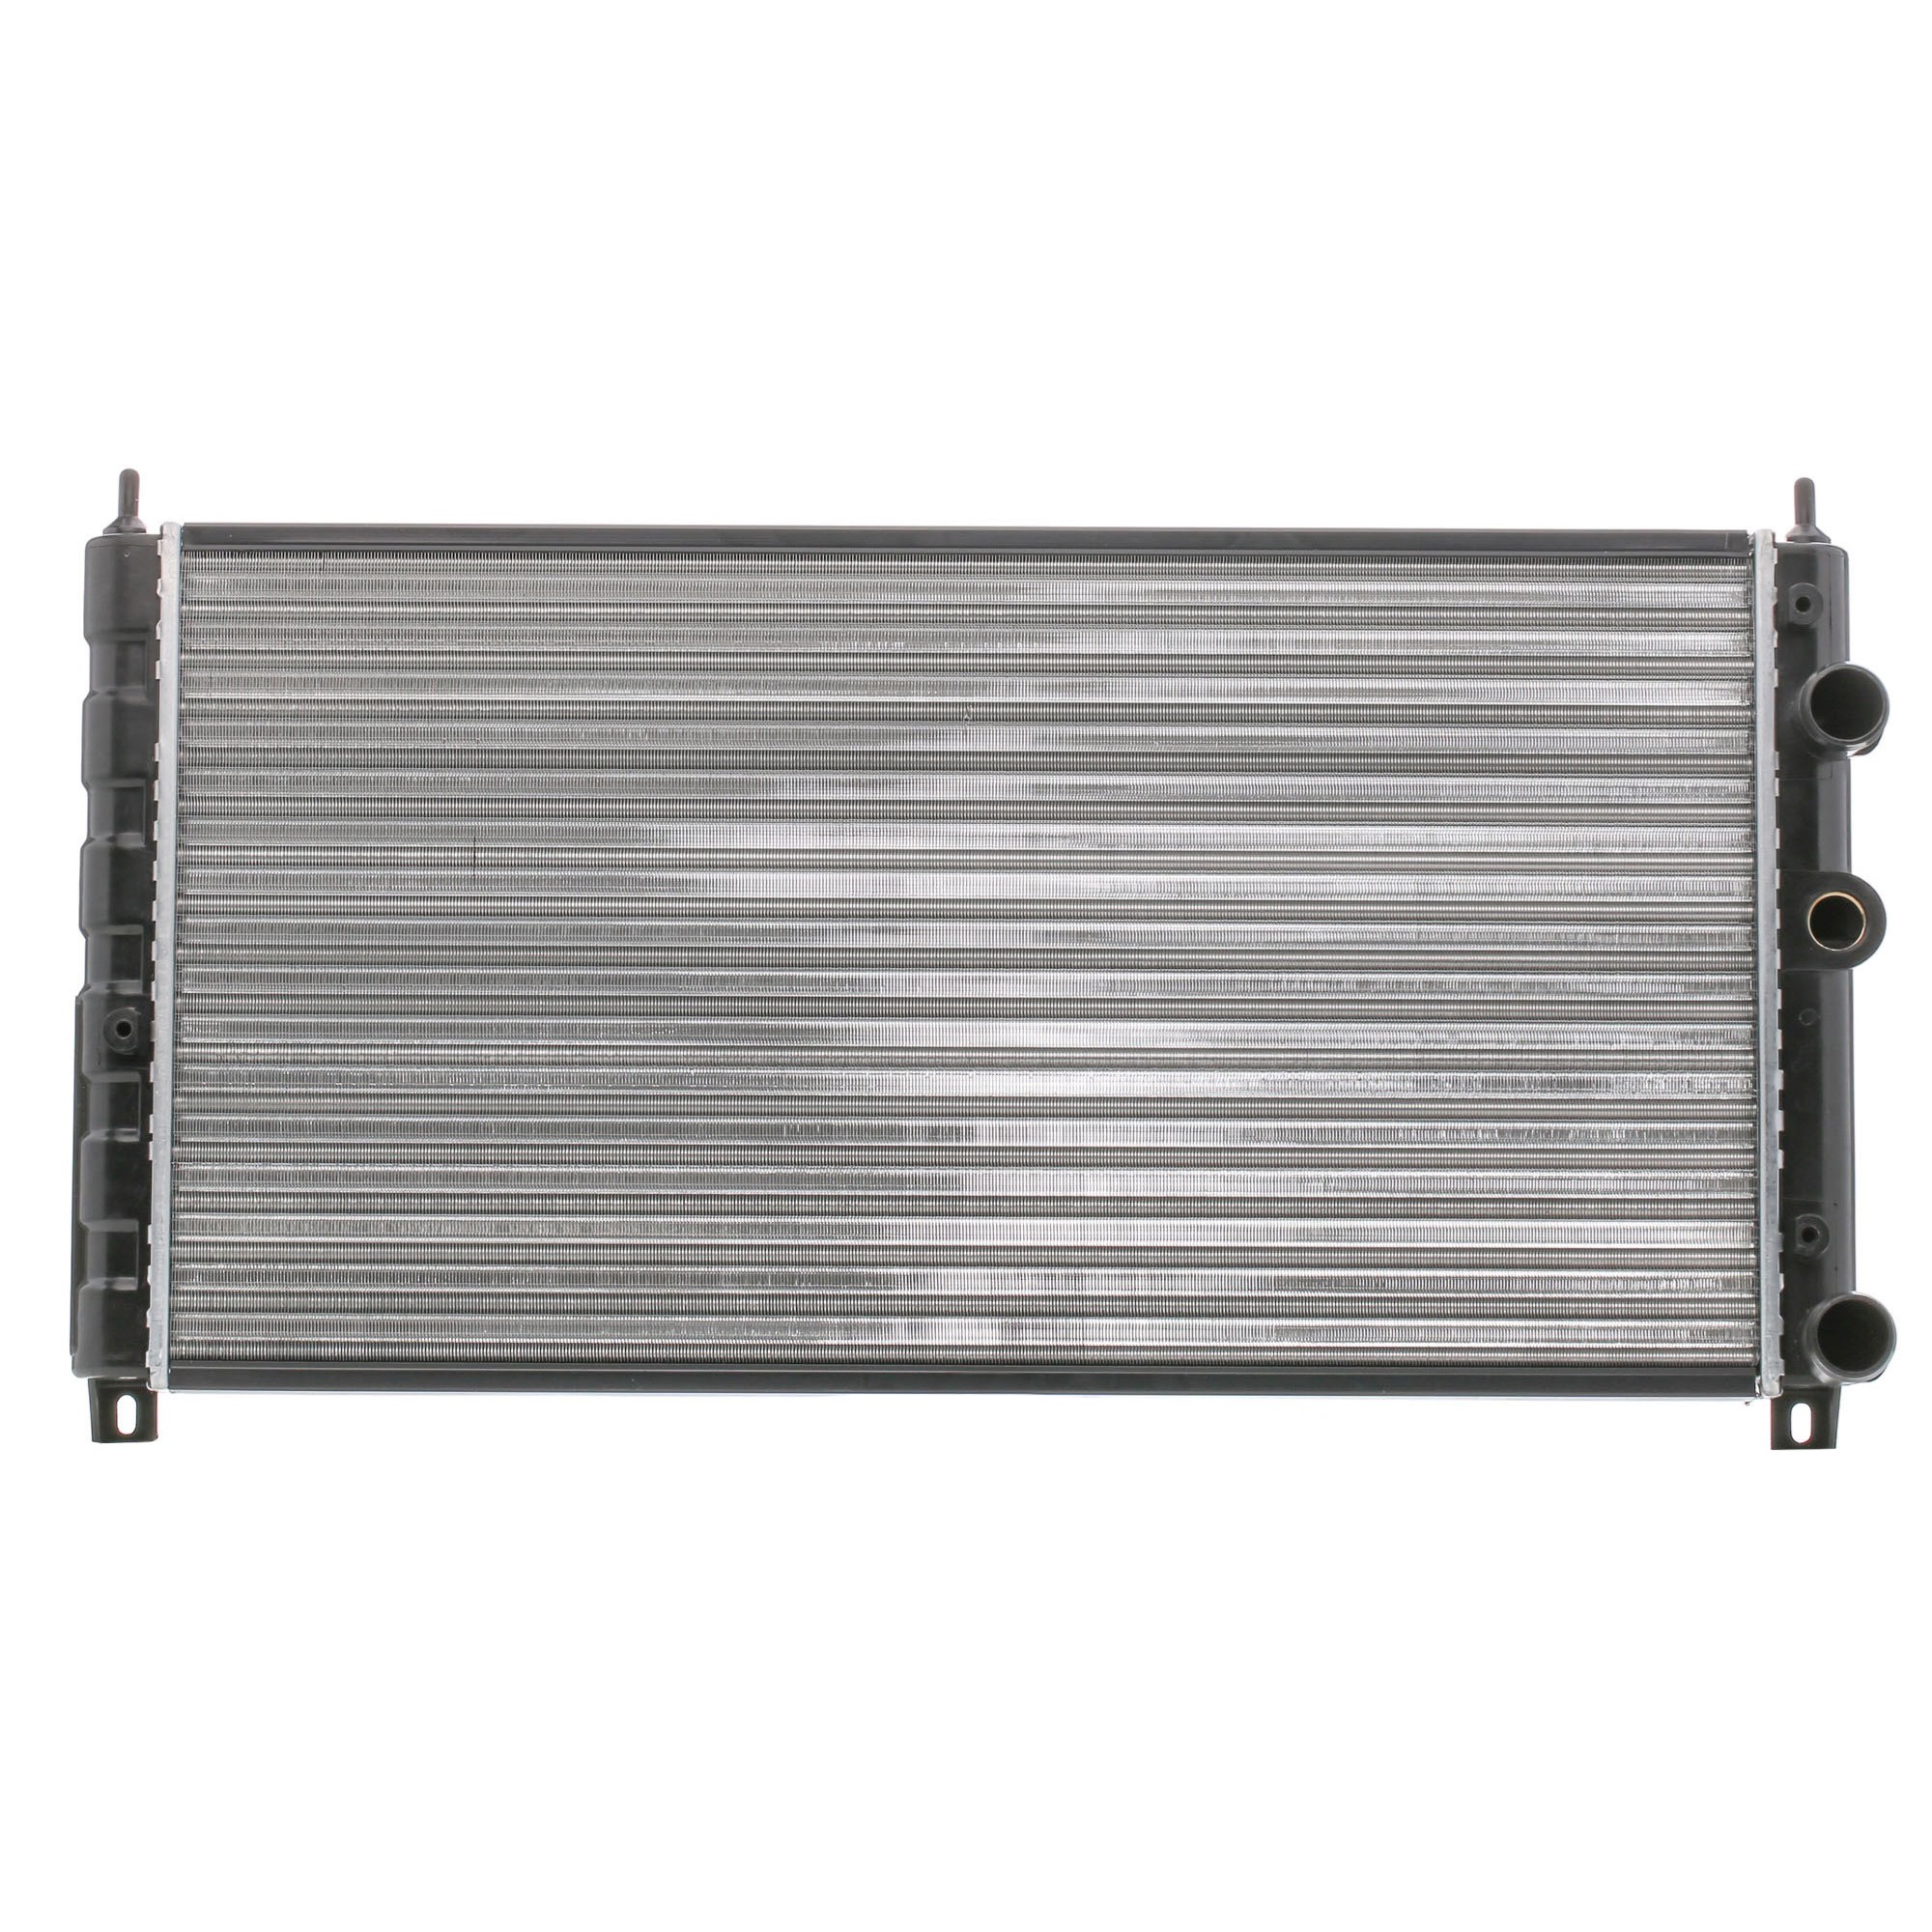 RIDEX 470R0297 Engine radiator Aluminium, Plastic, for vehicles with/without air conditioning, without frame, Manual Transmission